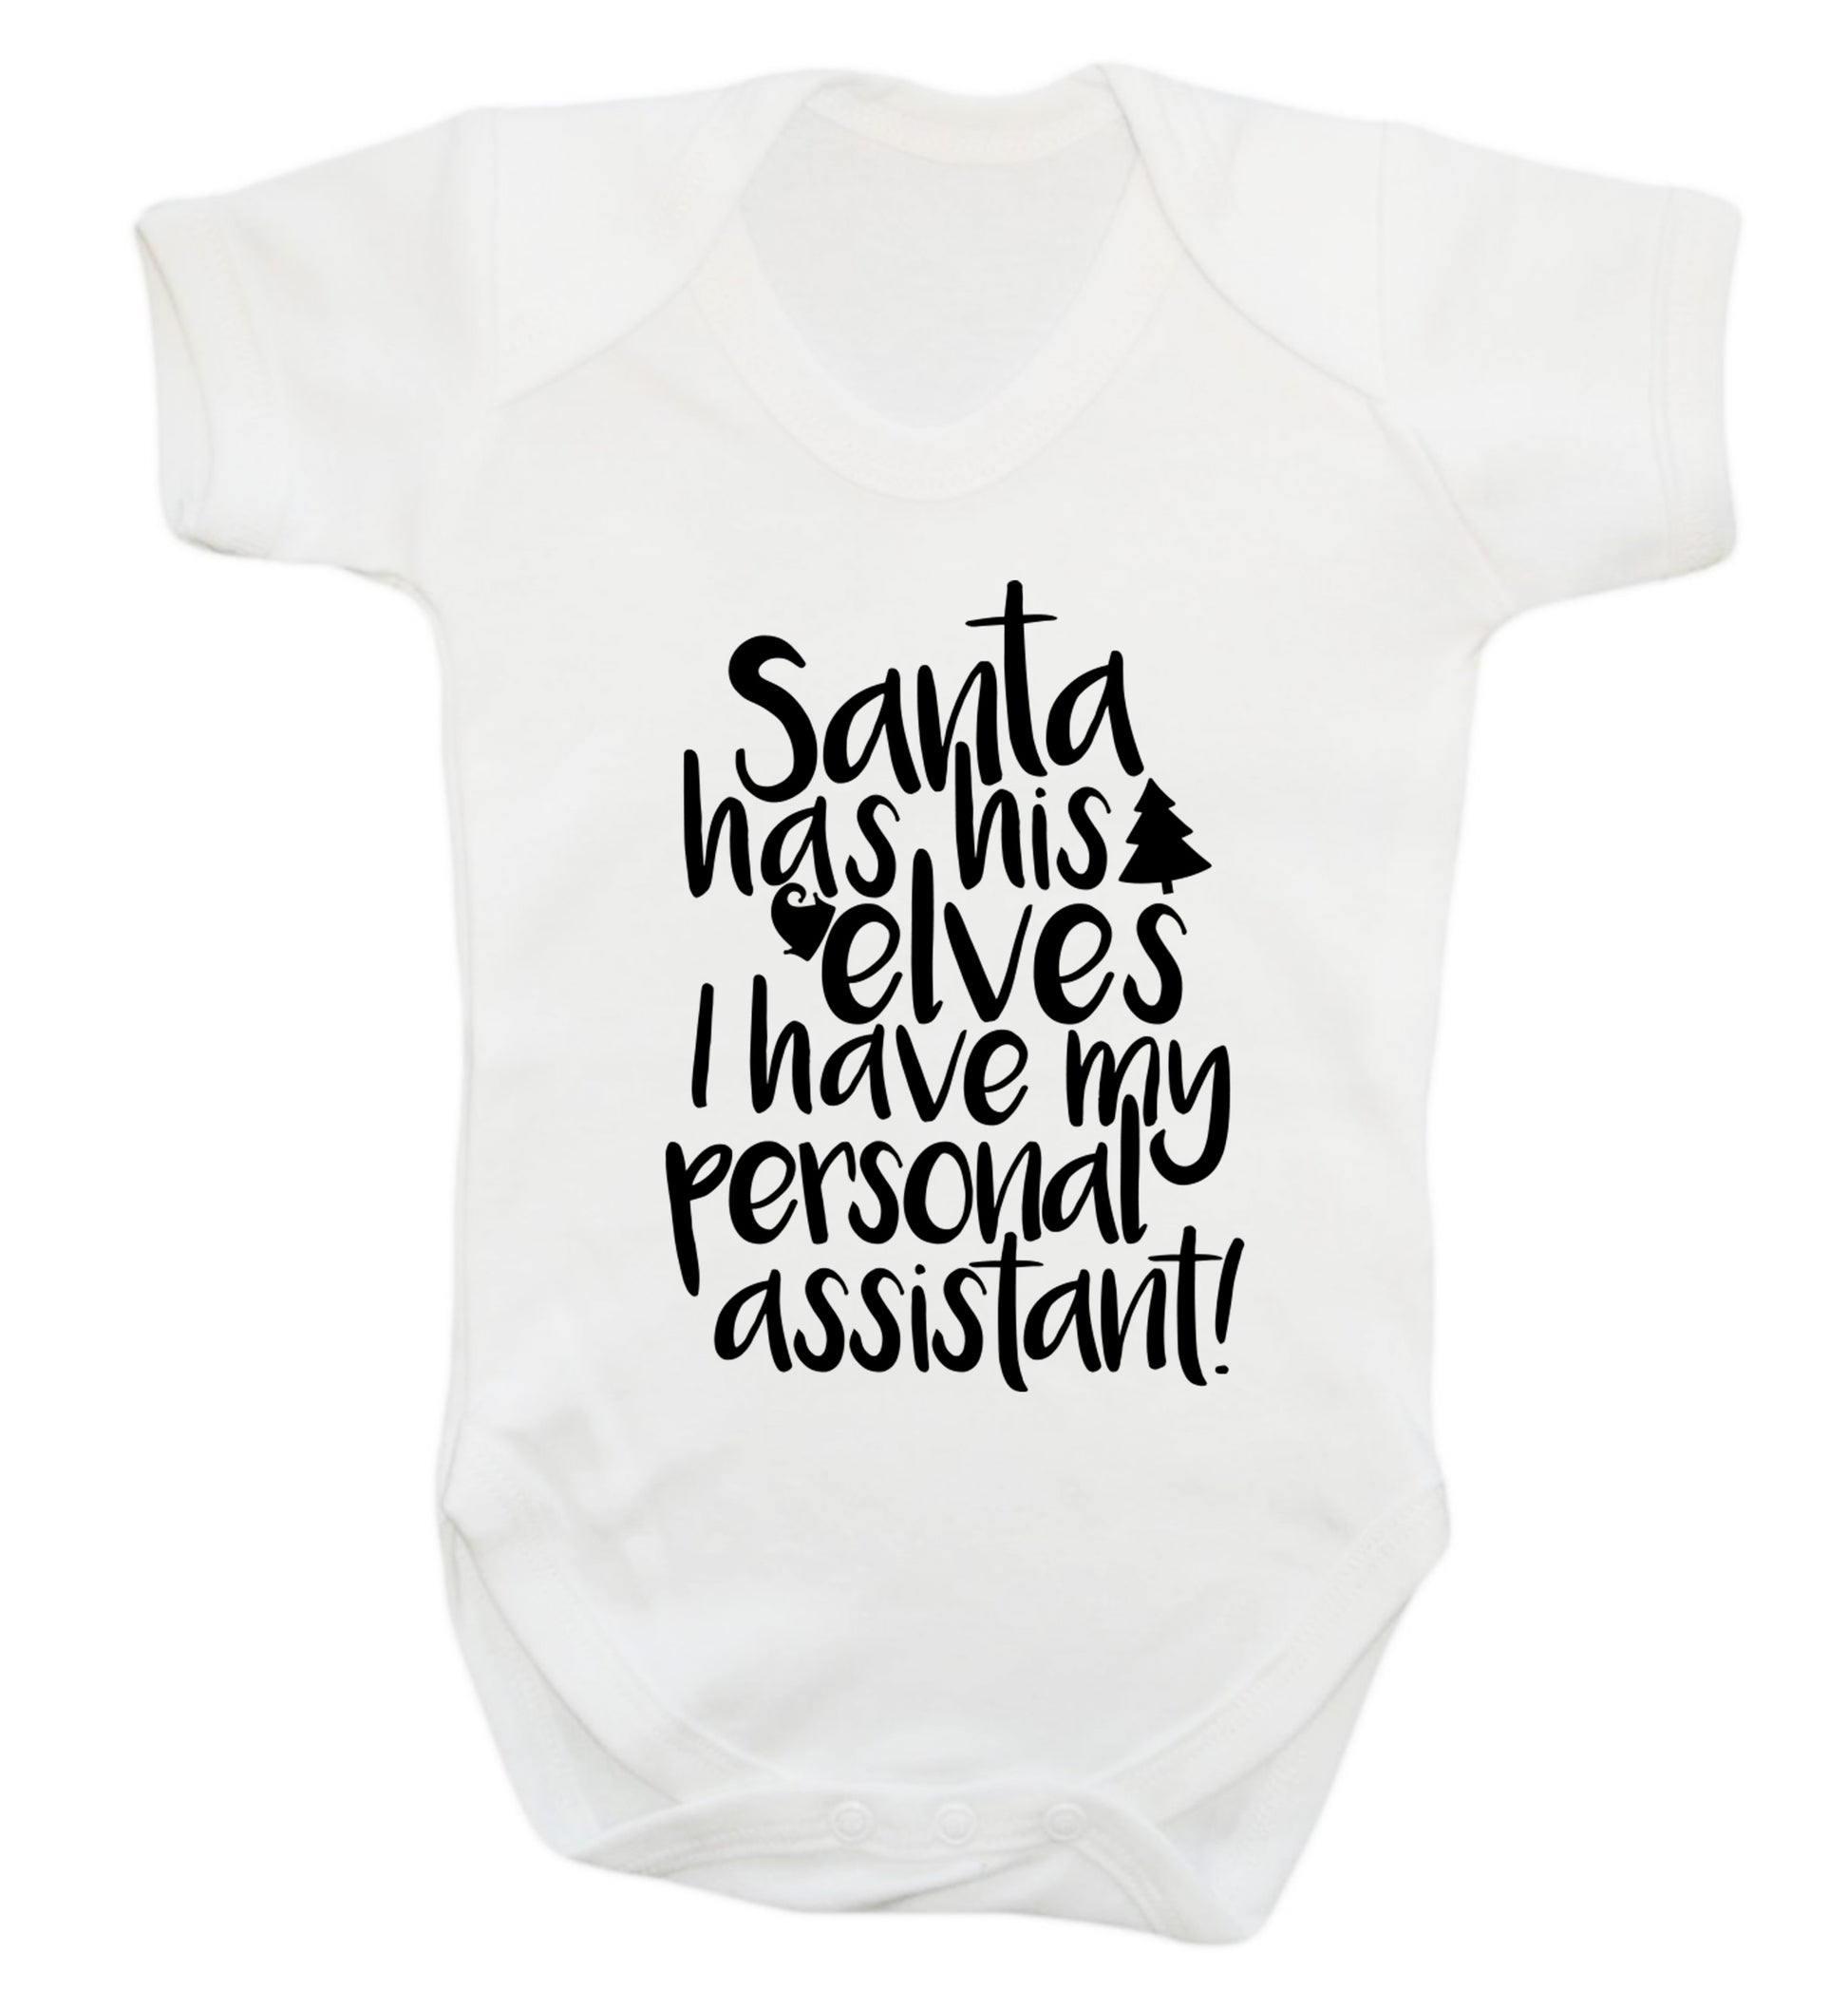 Santa has his elves I have my personal assistant Baby Vest white 18-24 months